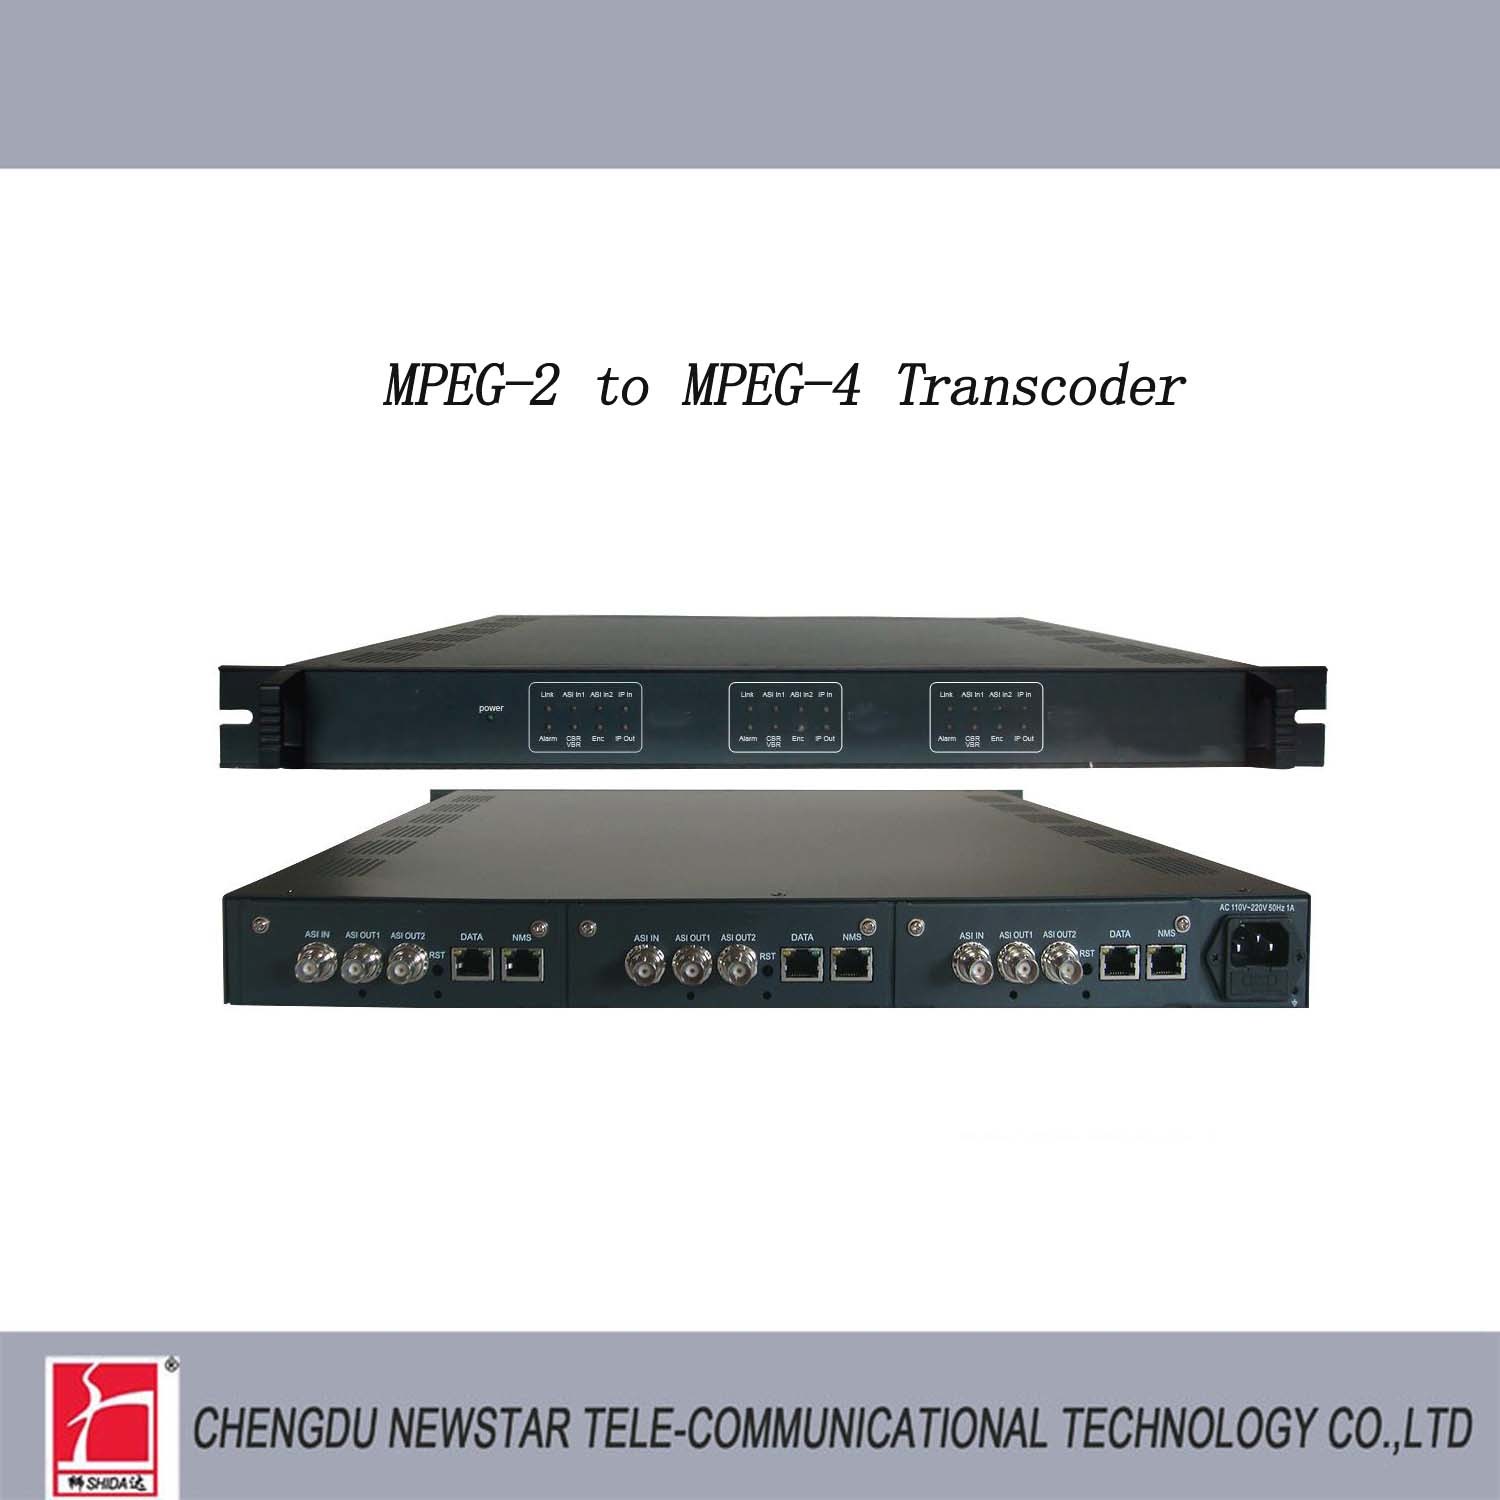 MPEG-2 to MPEG-4 Transcoder